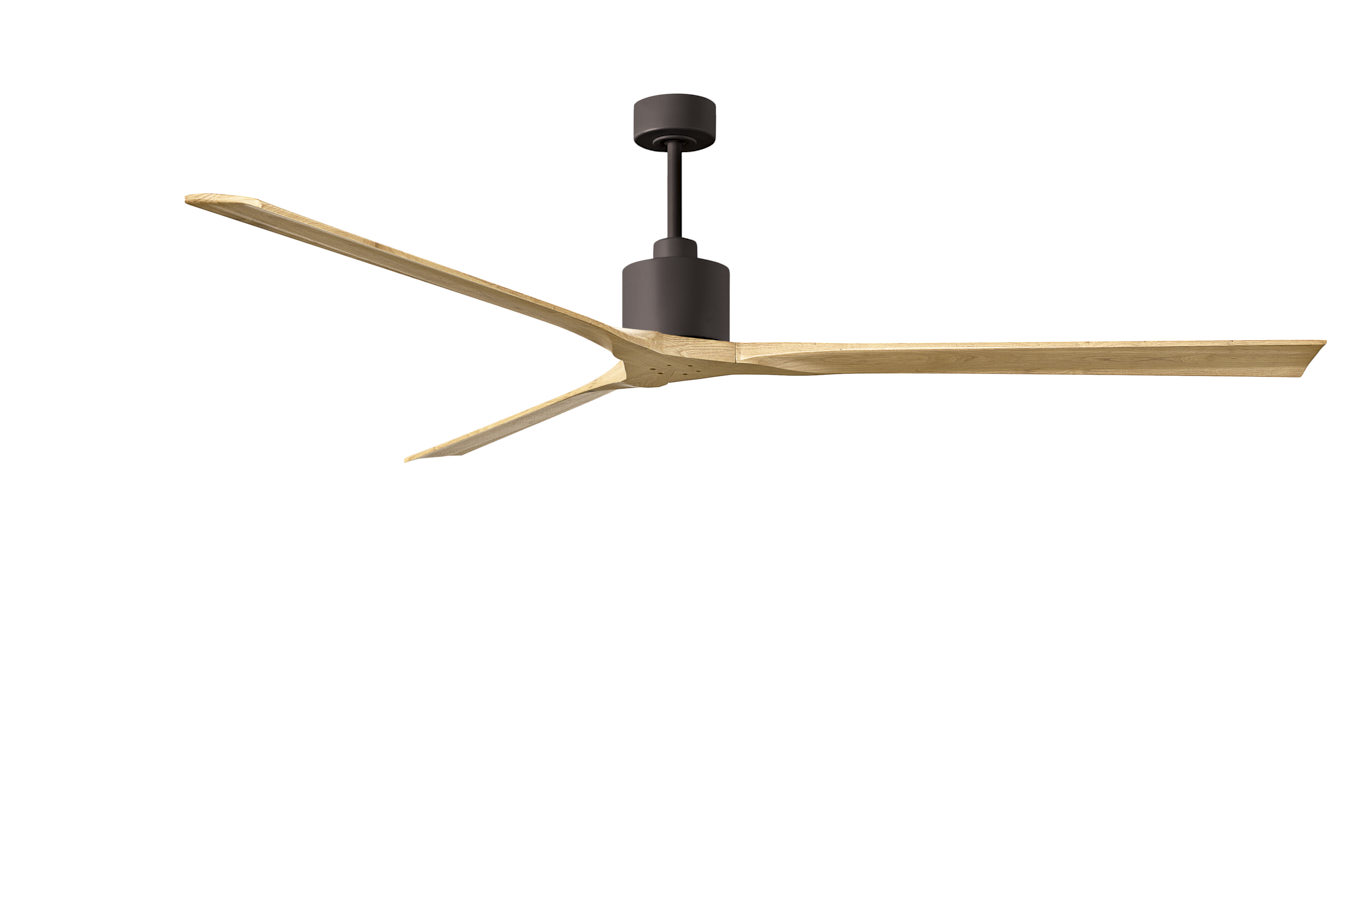 Nan XL ceiling fan in Textured Bronze with 90” Light Maple blades